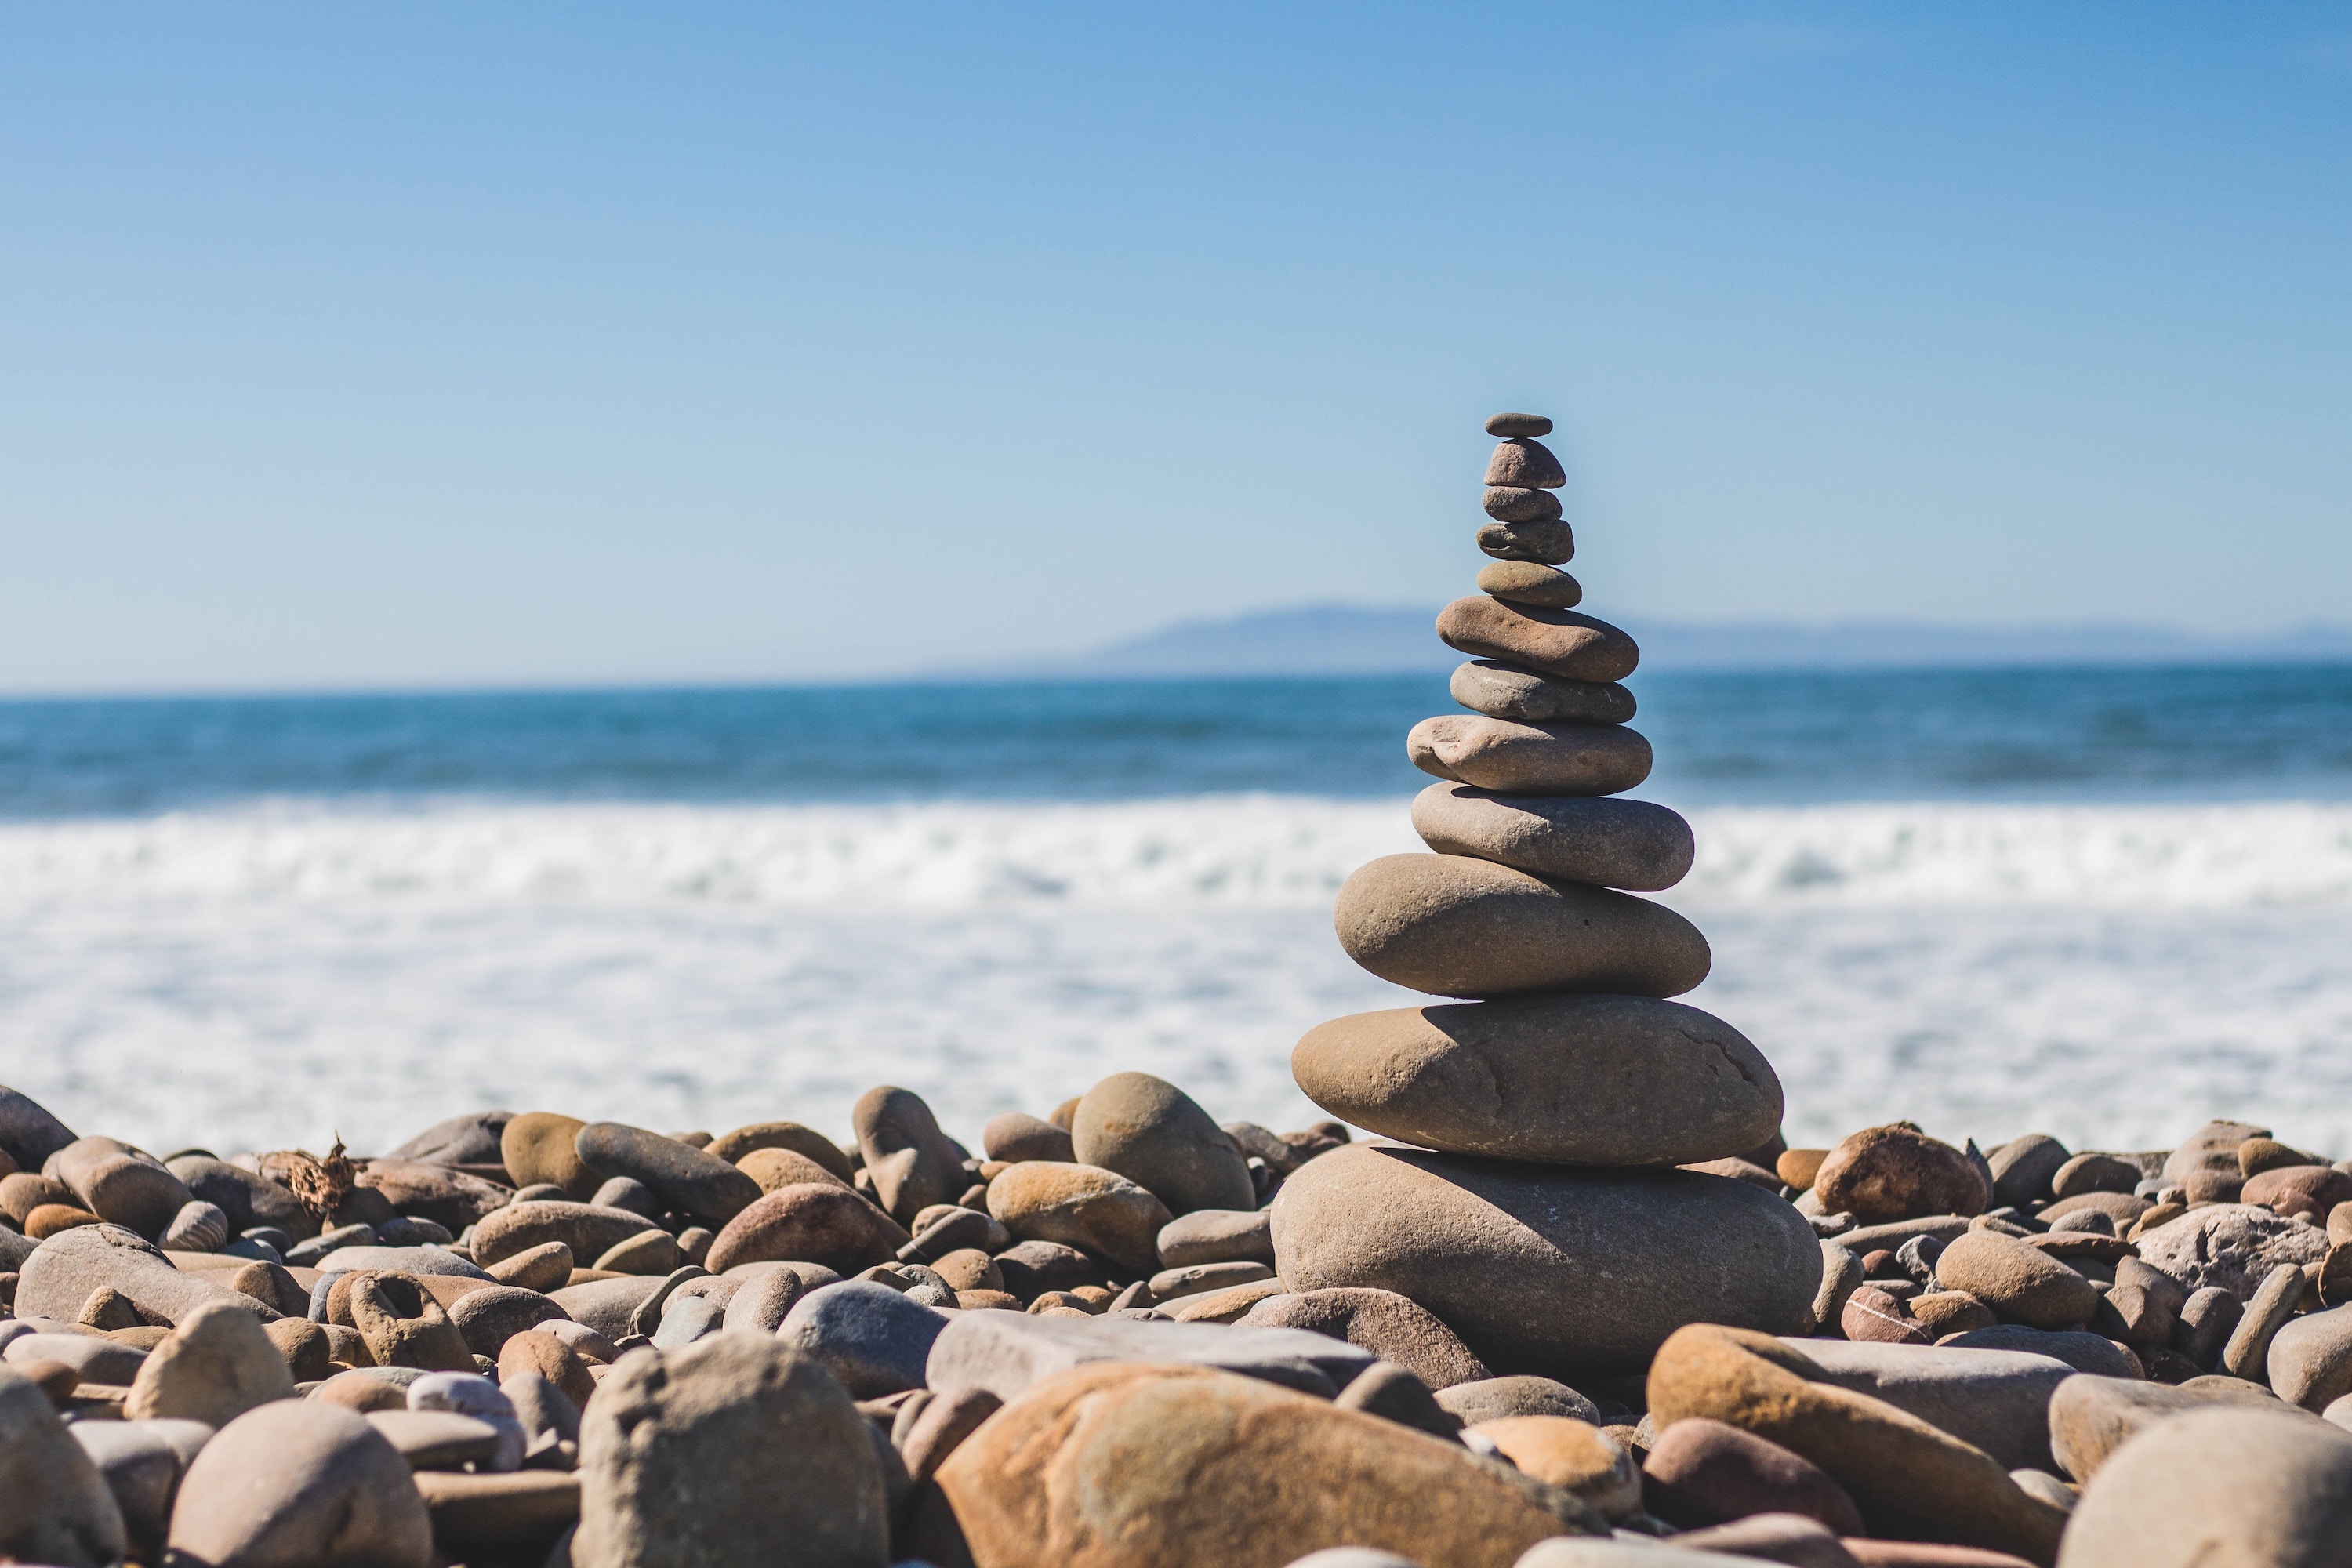 A photo of stacked rounded stones at the beach by Jeremy Thomas